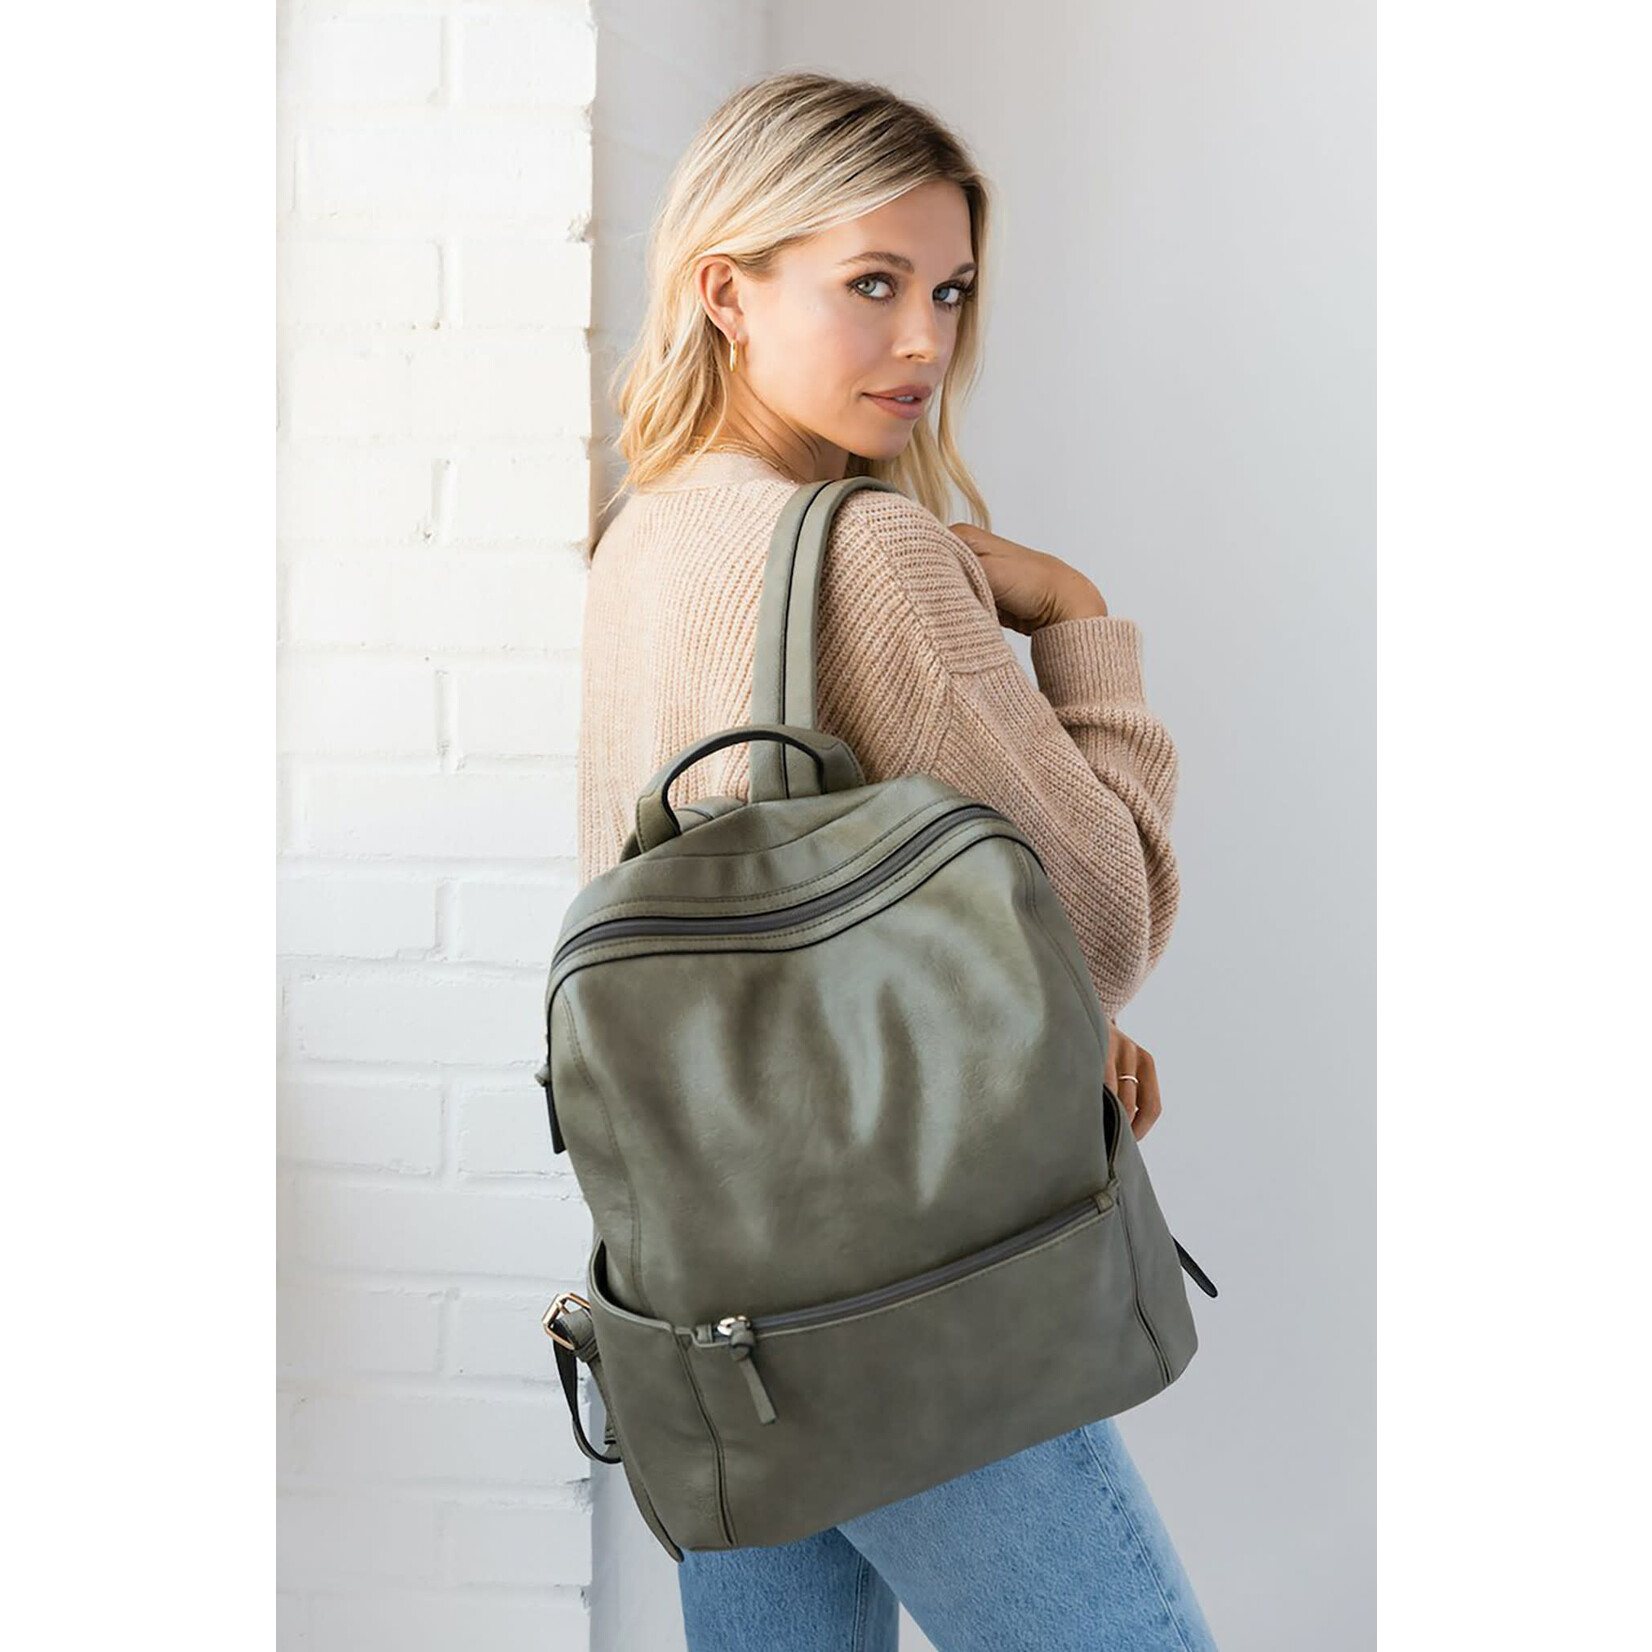 James Backpack with Front Zip Pocket